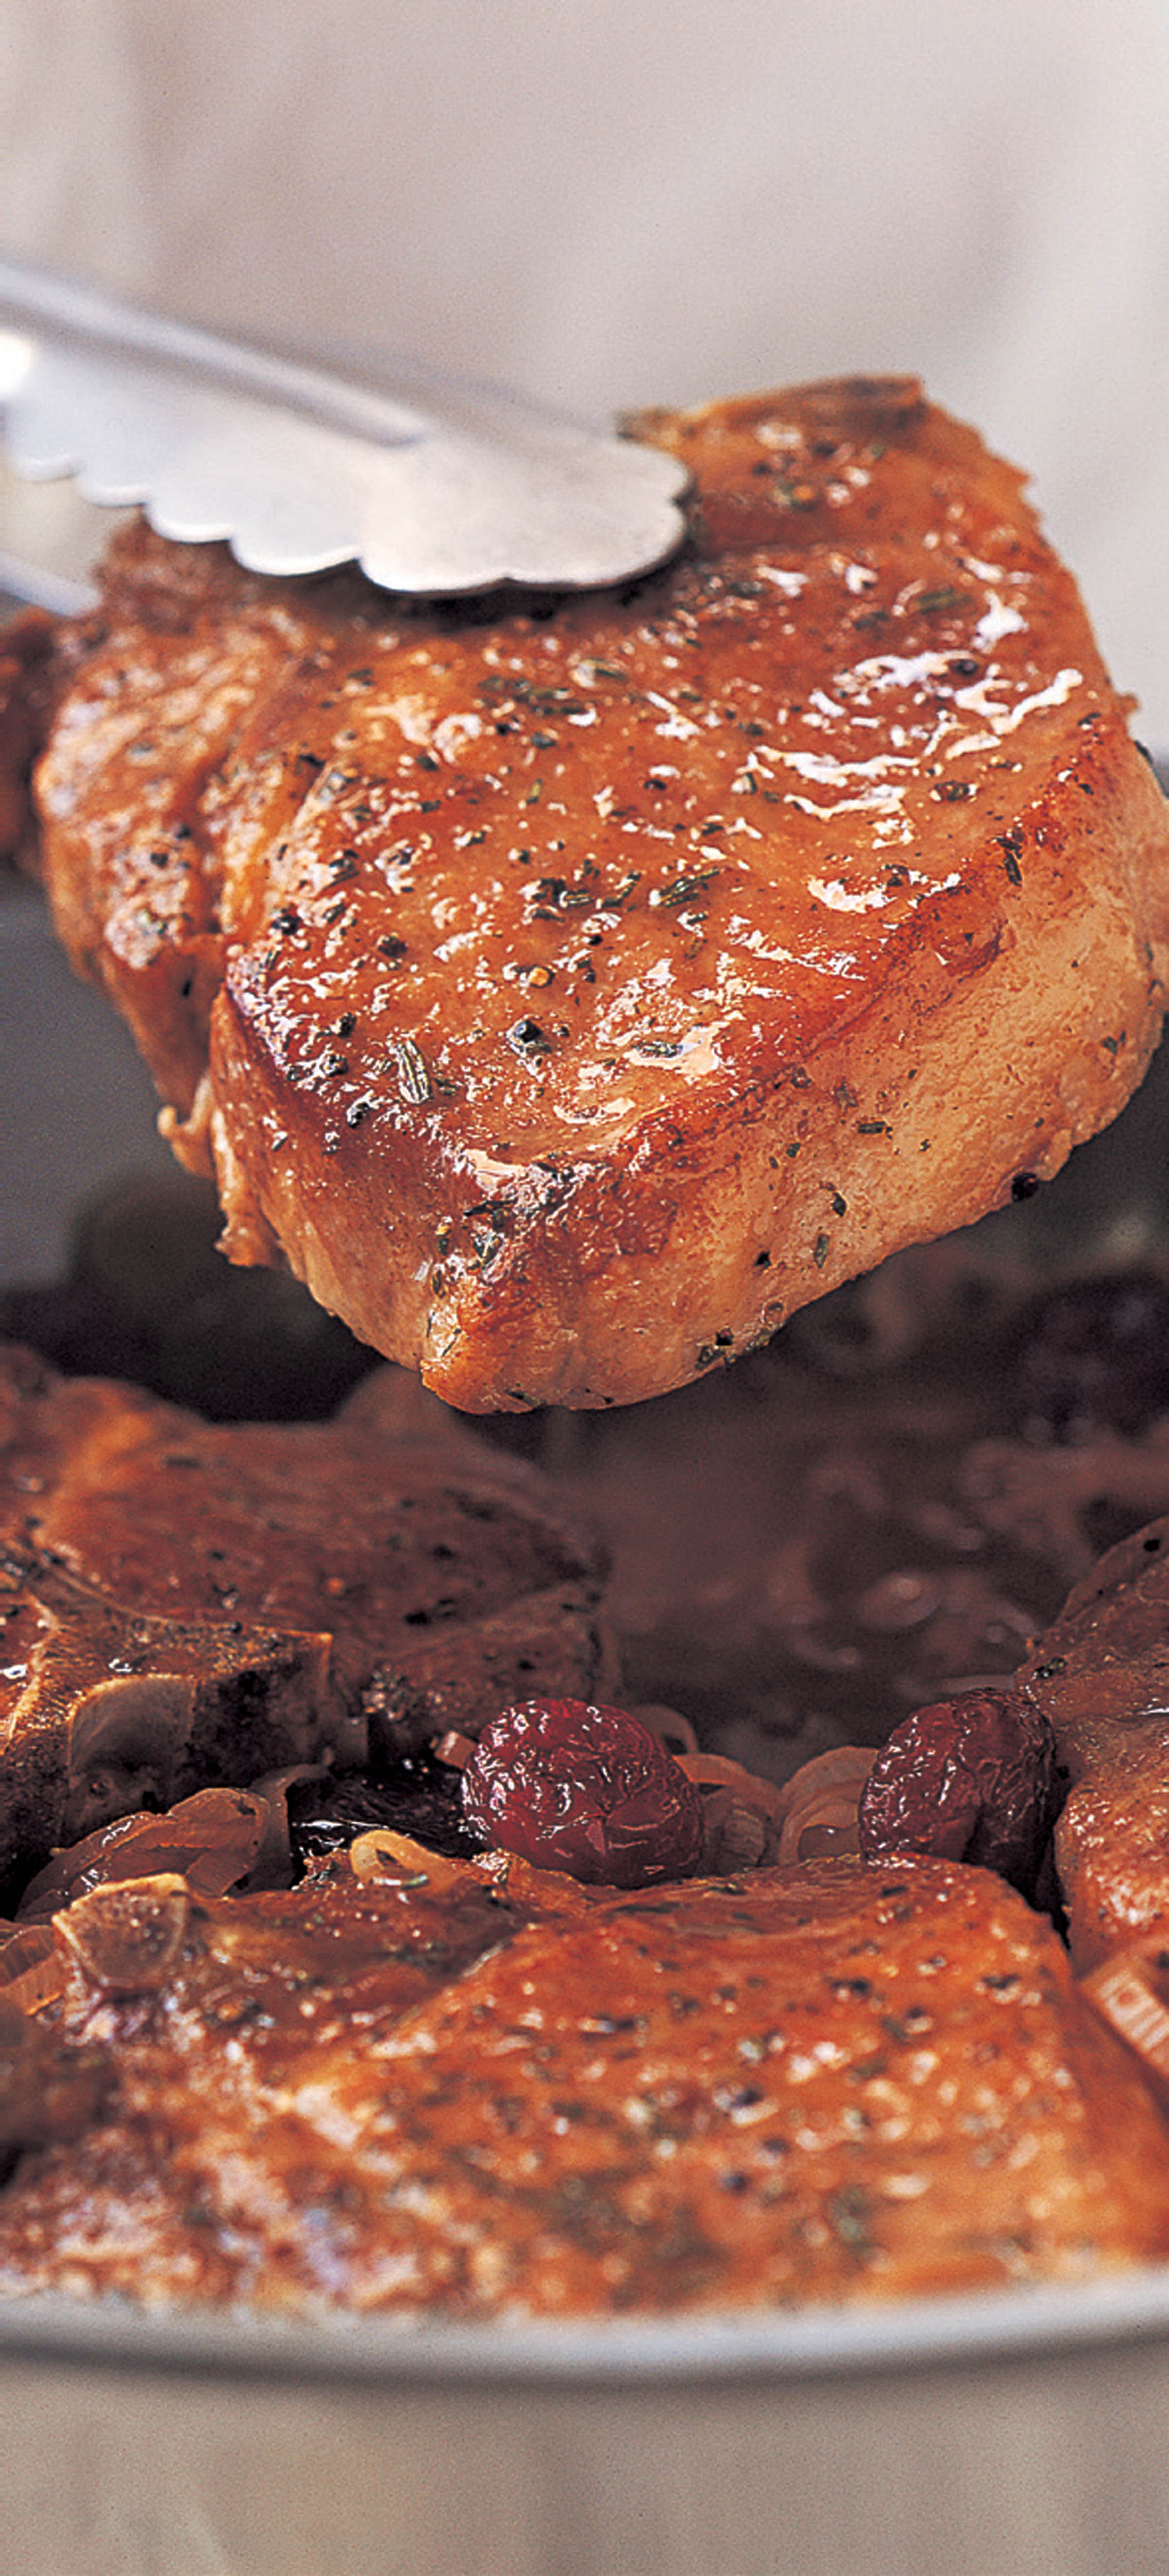 Braised Pork Chops with Cherry Sauce from The Weeknight Cook by Brigit ...